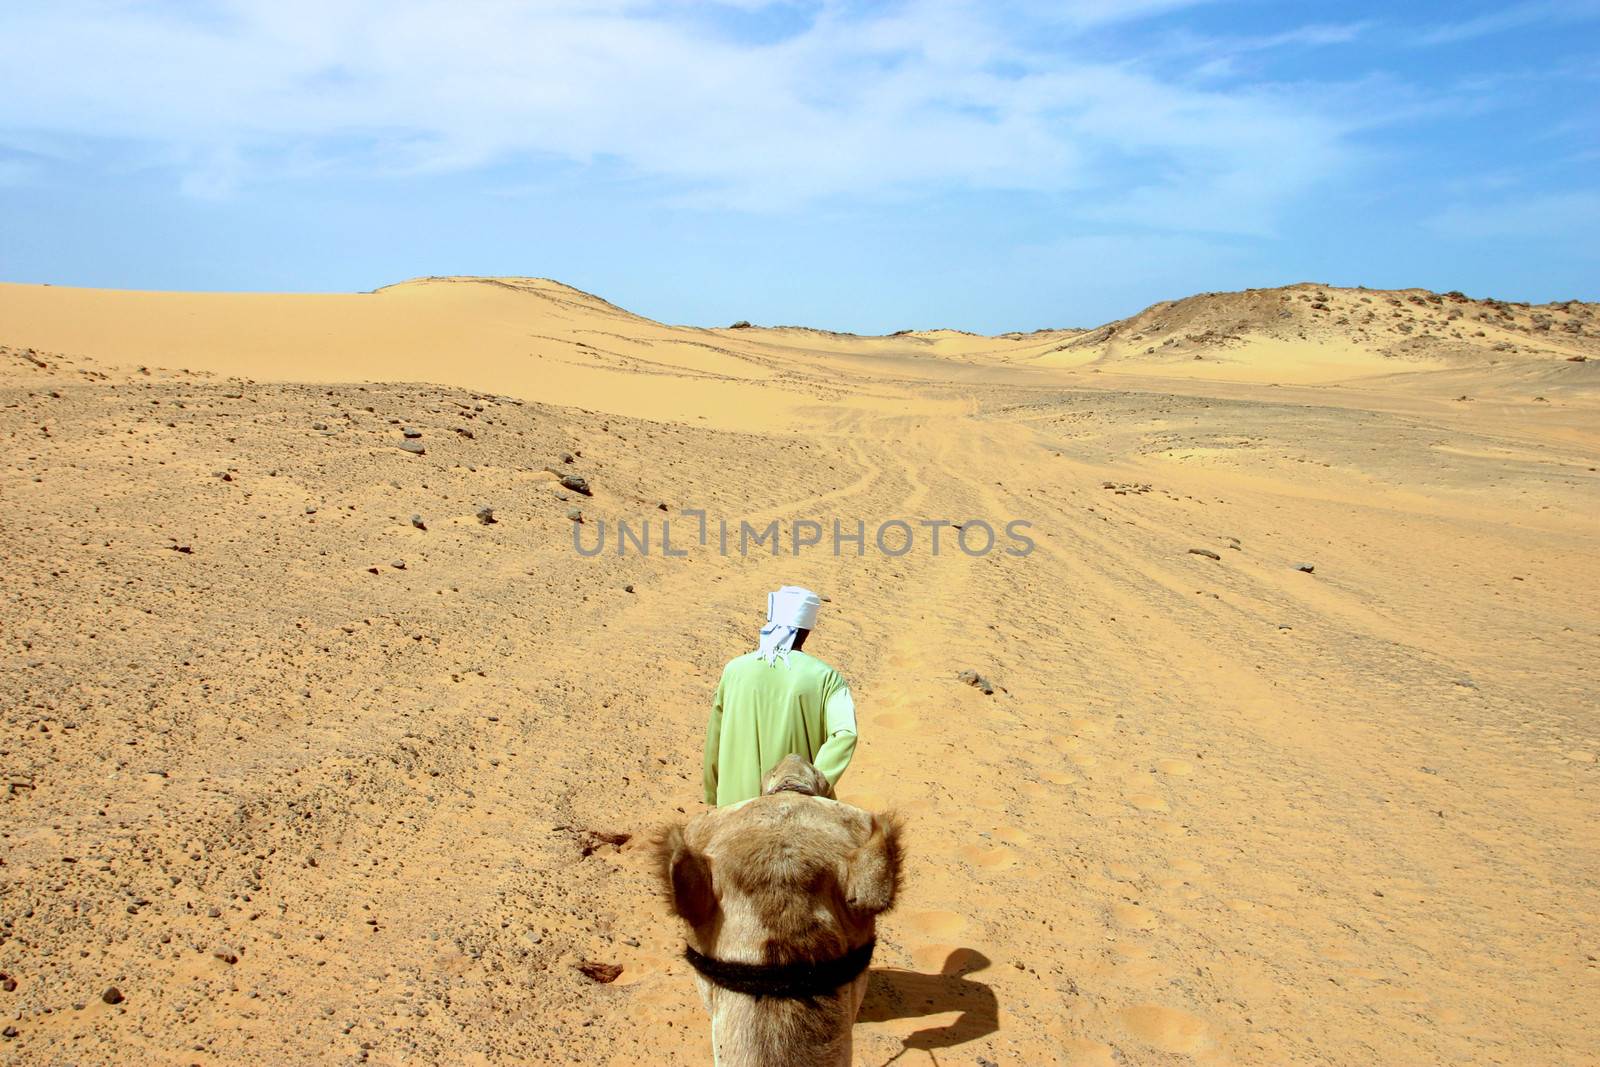 Bedouin guide with a camel in the sandy and deserted dunes in the Libyan desert.